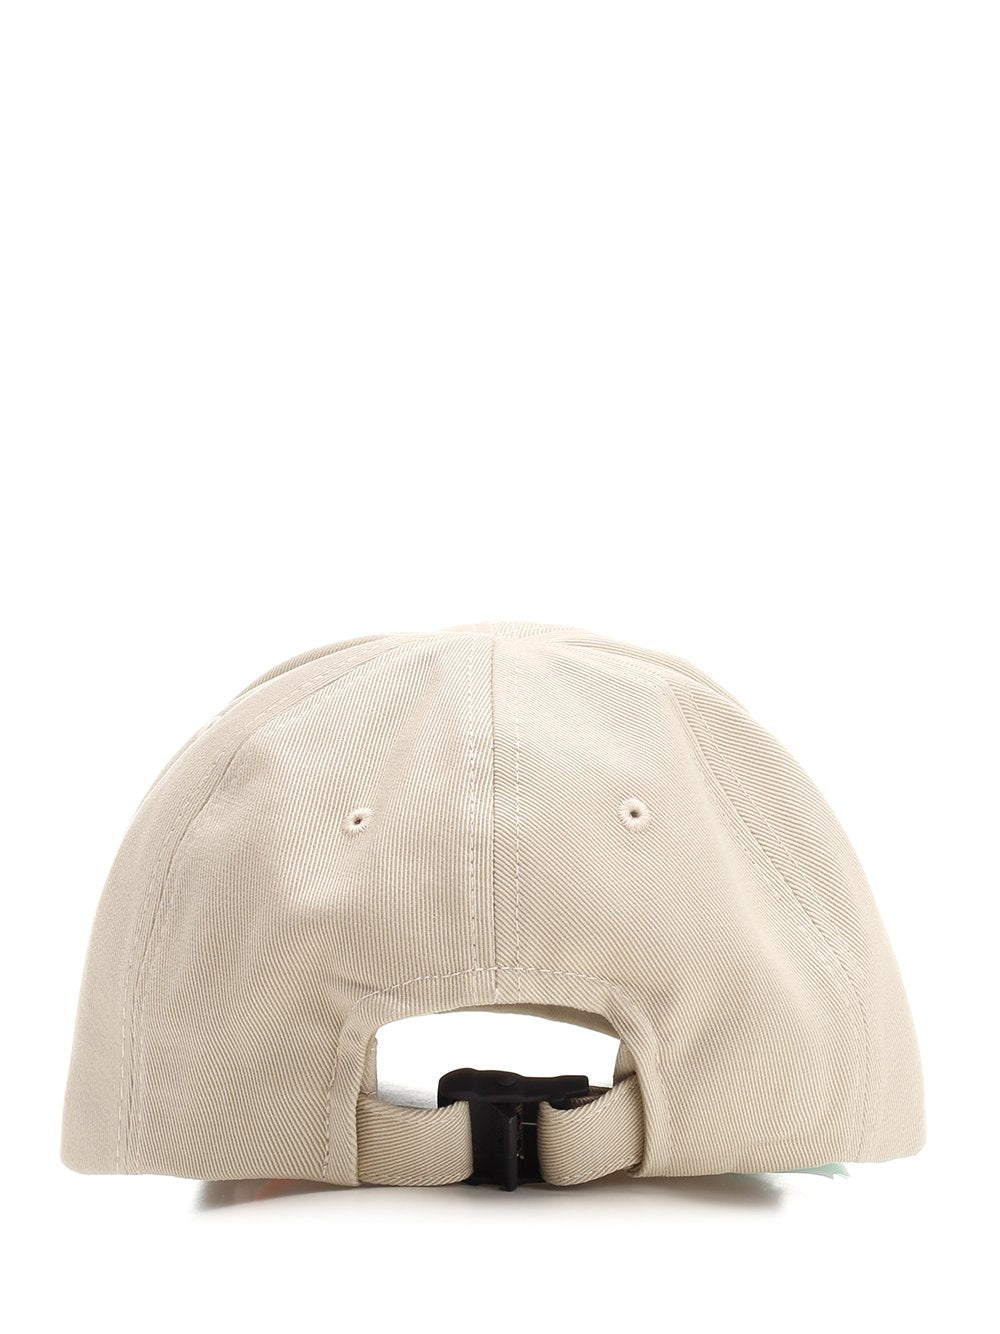 Off-White Arrows Embroidered Baseball Cap